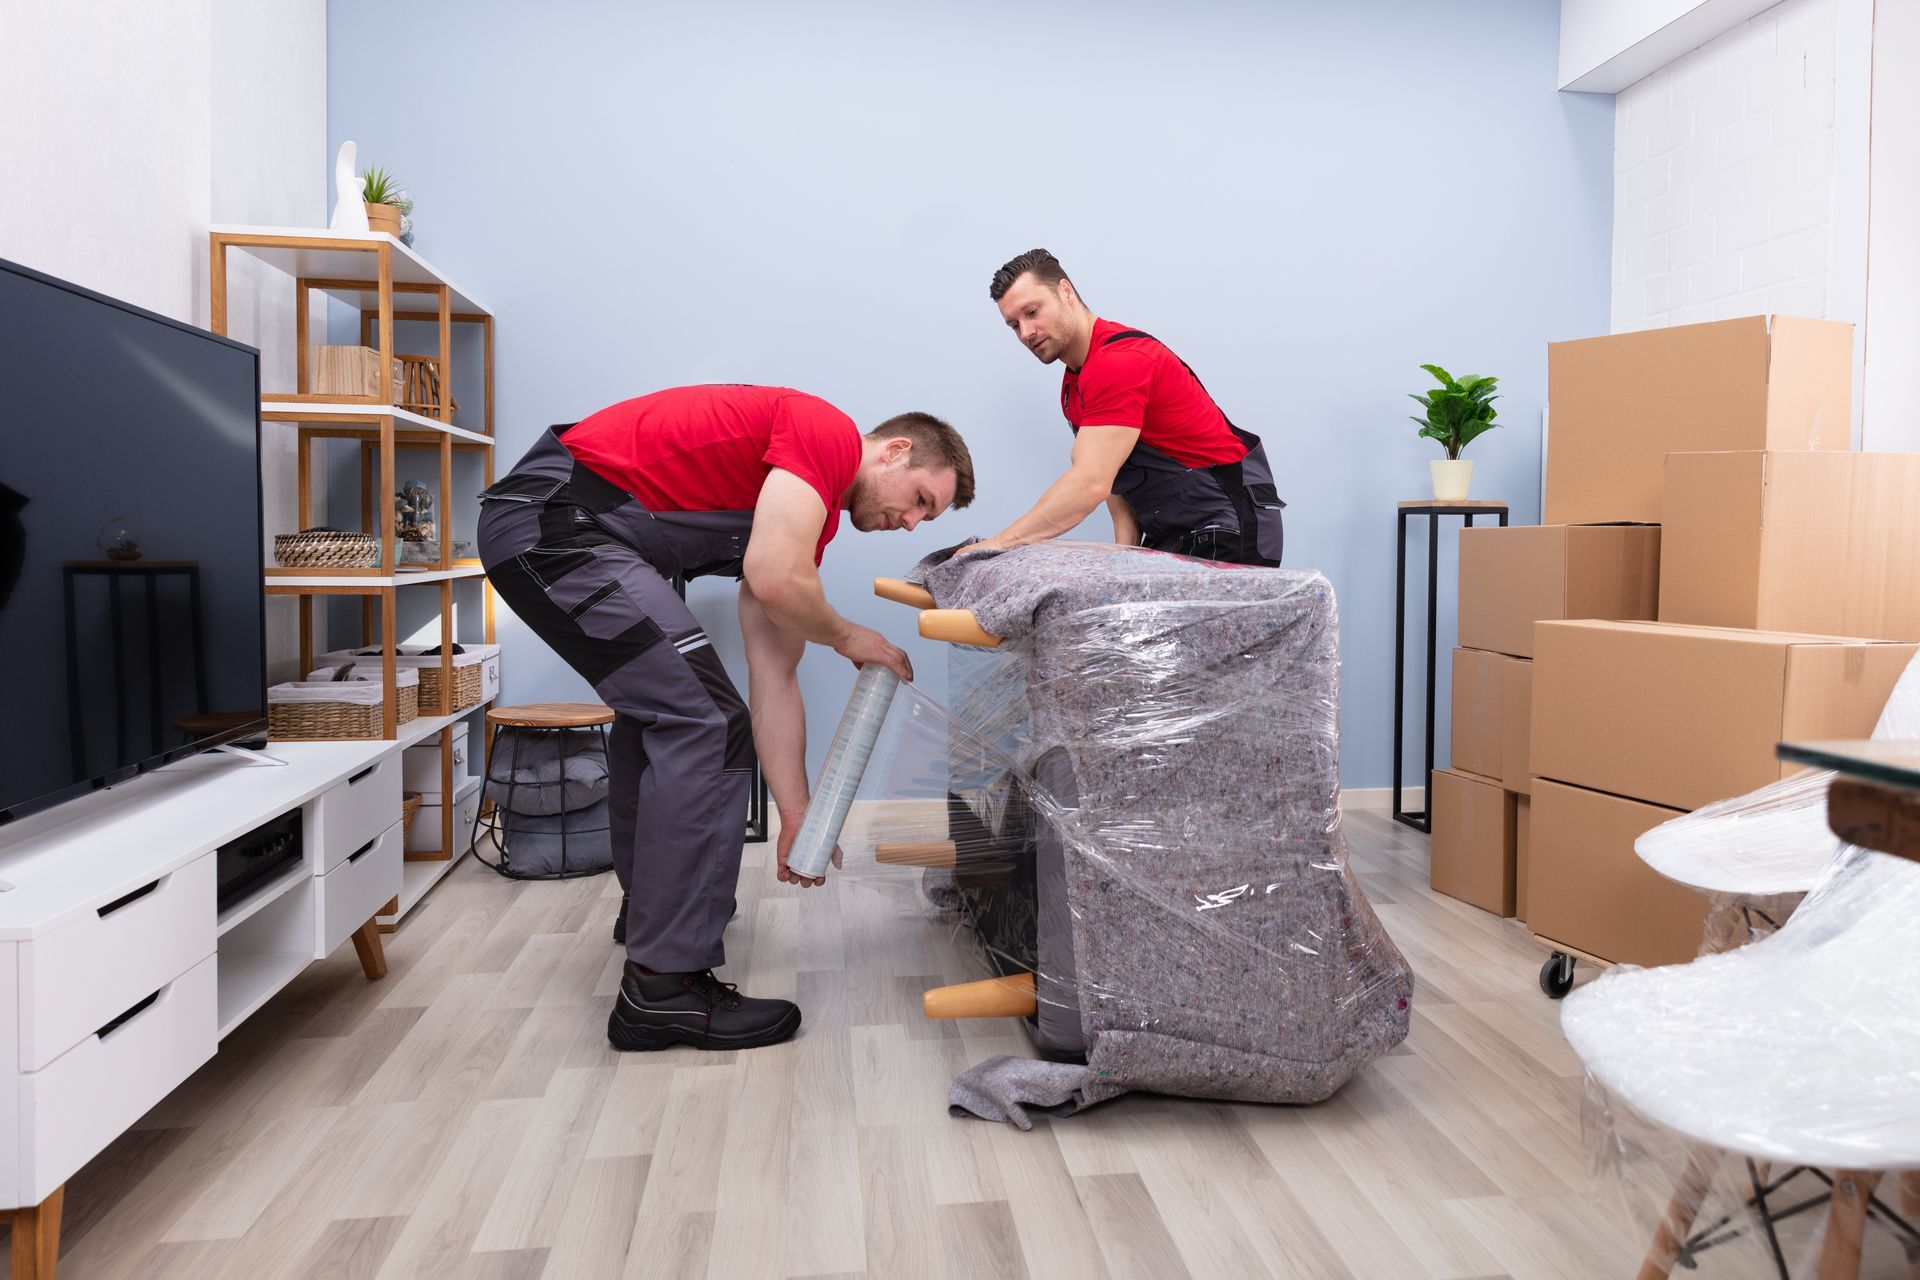 Two men are moving a couch in a living room.